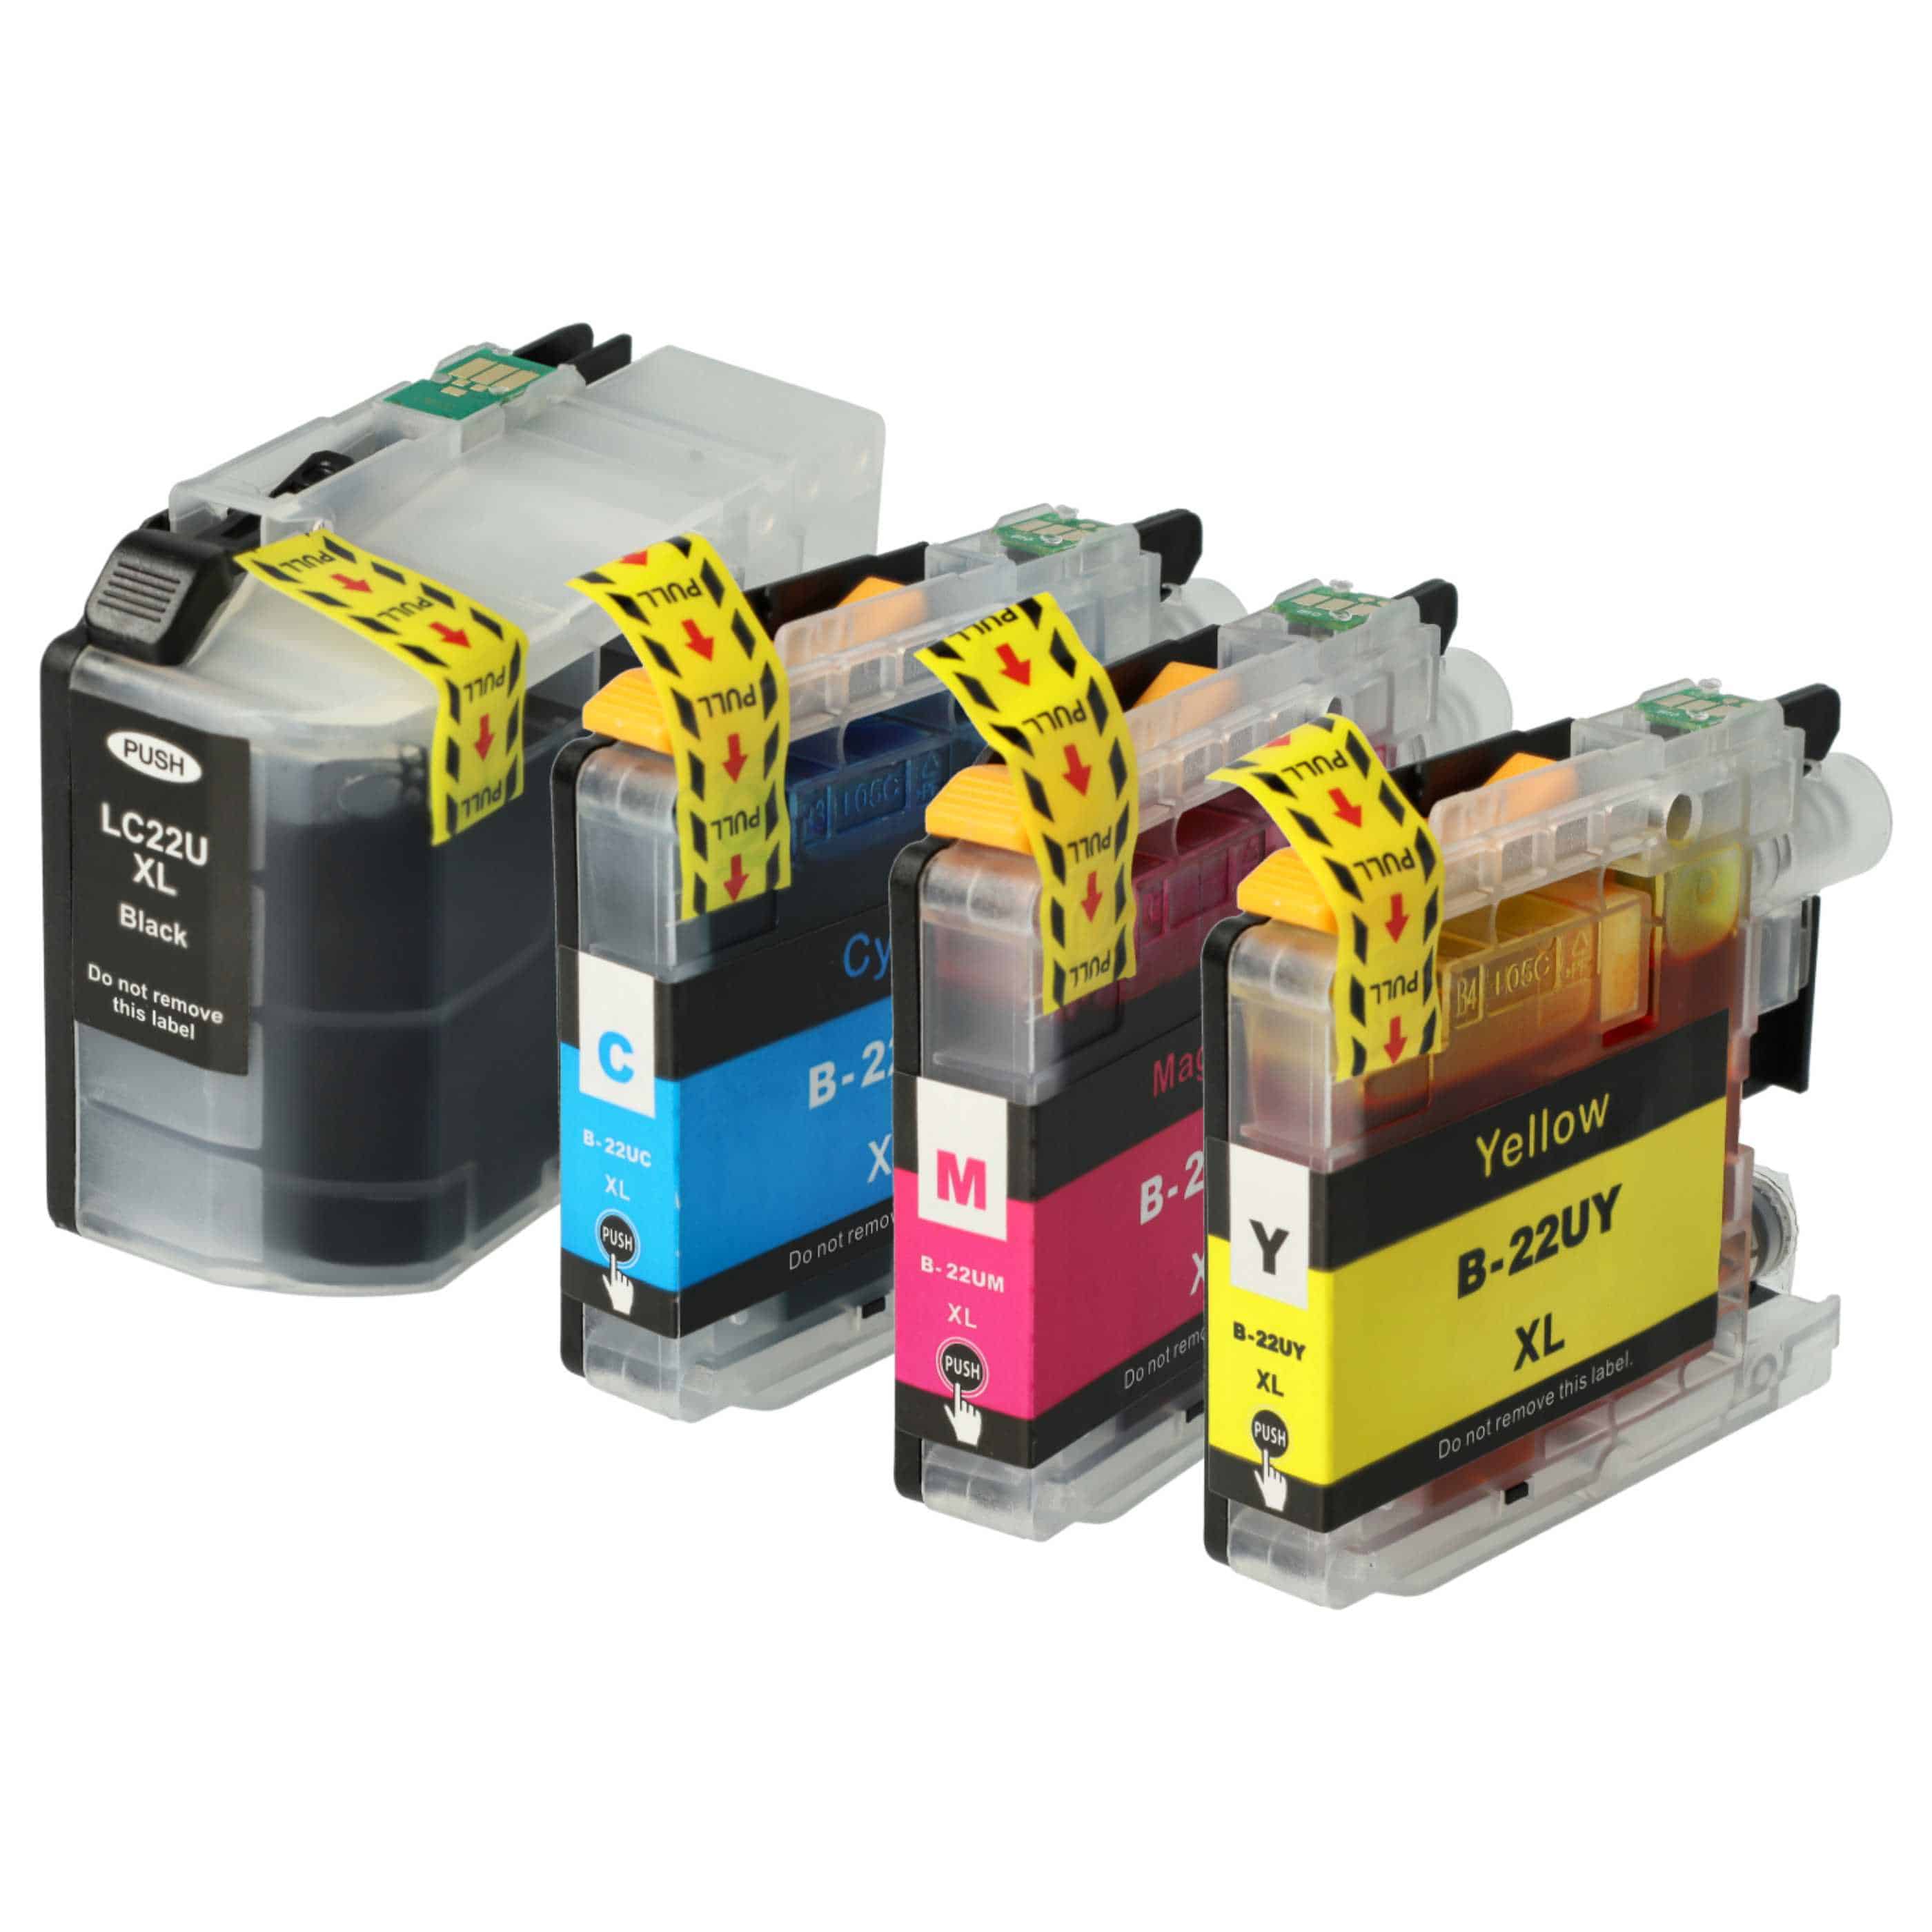 4x Ink Cartridges replaces Brother LC22UBK, LC-22U BK, LC-22UBK for DCP-J925DW Printer - Multi-Coloured